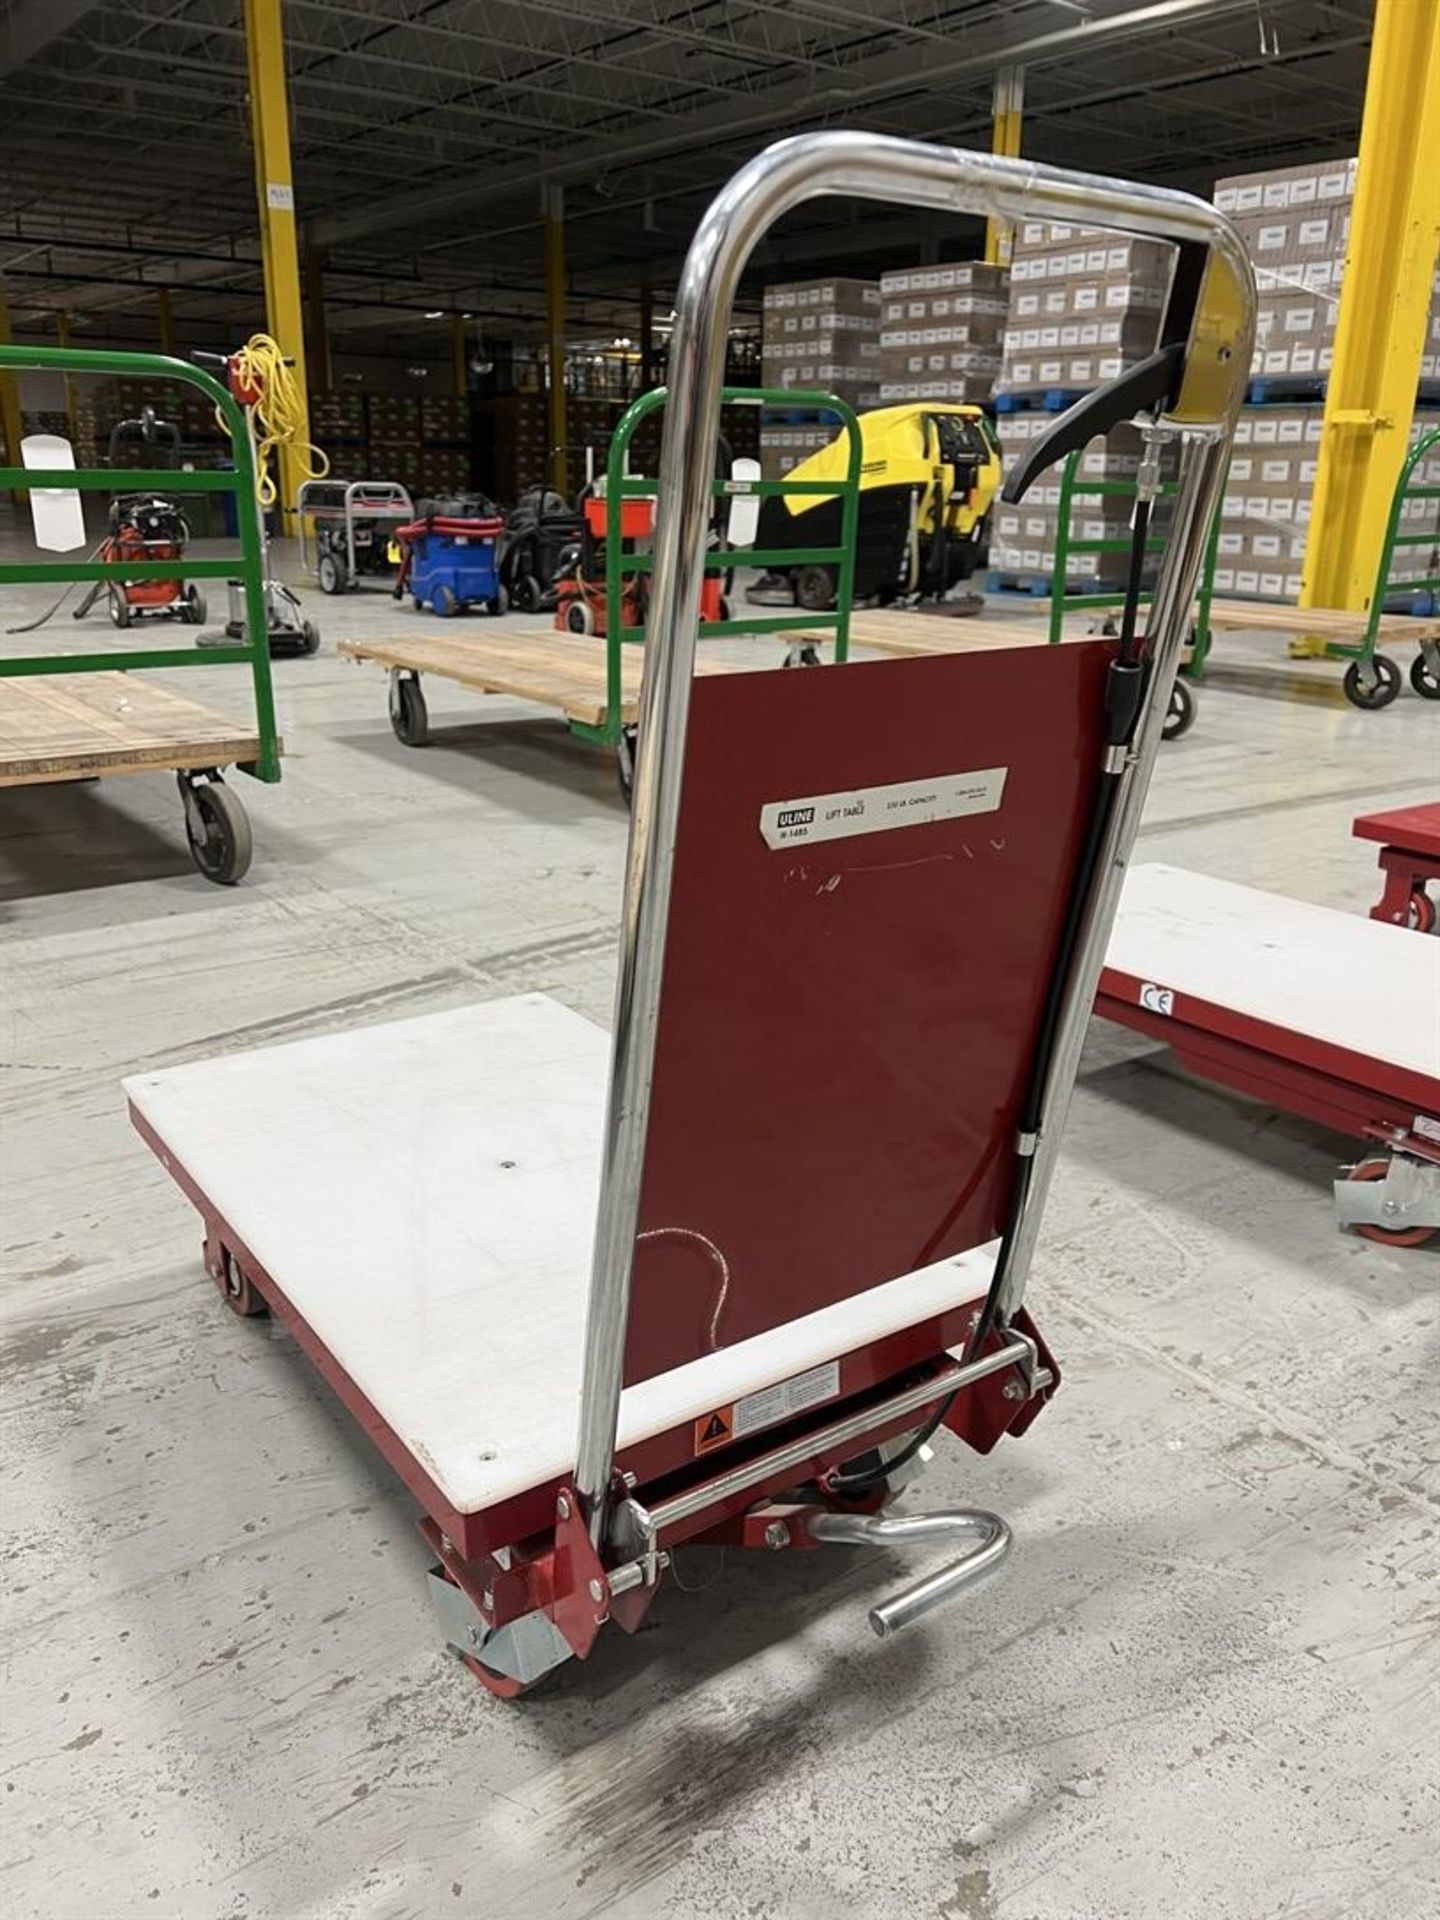 ULINE H-1485 Lift Table Cart, 27" x 18", 330 Lb. Capacity - Image 2 of 2